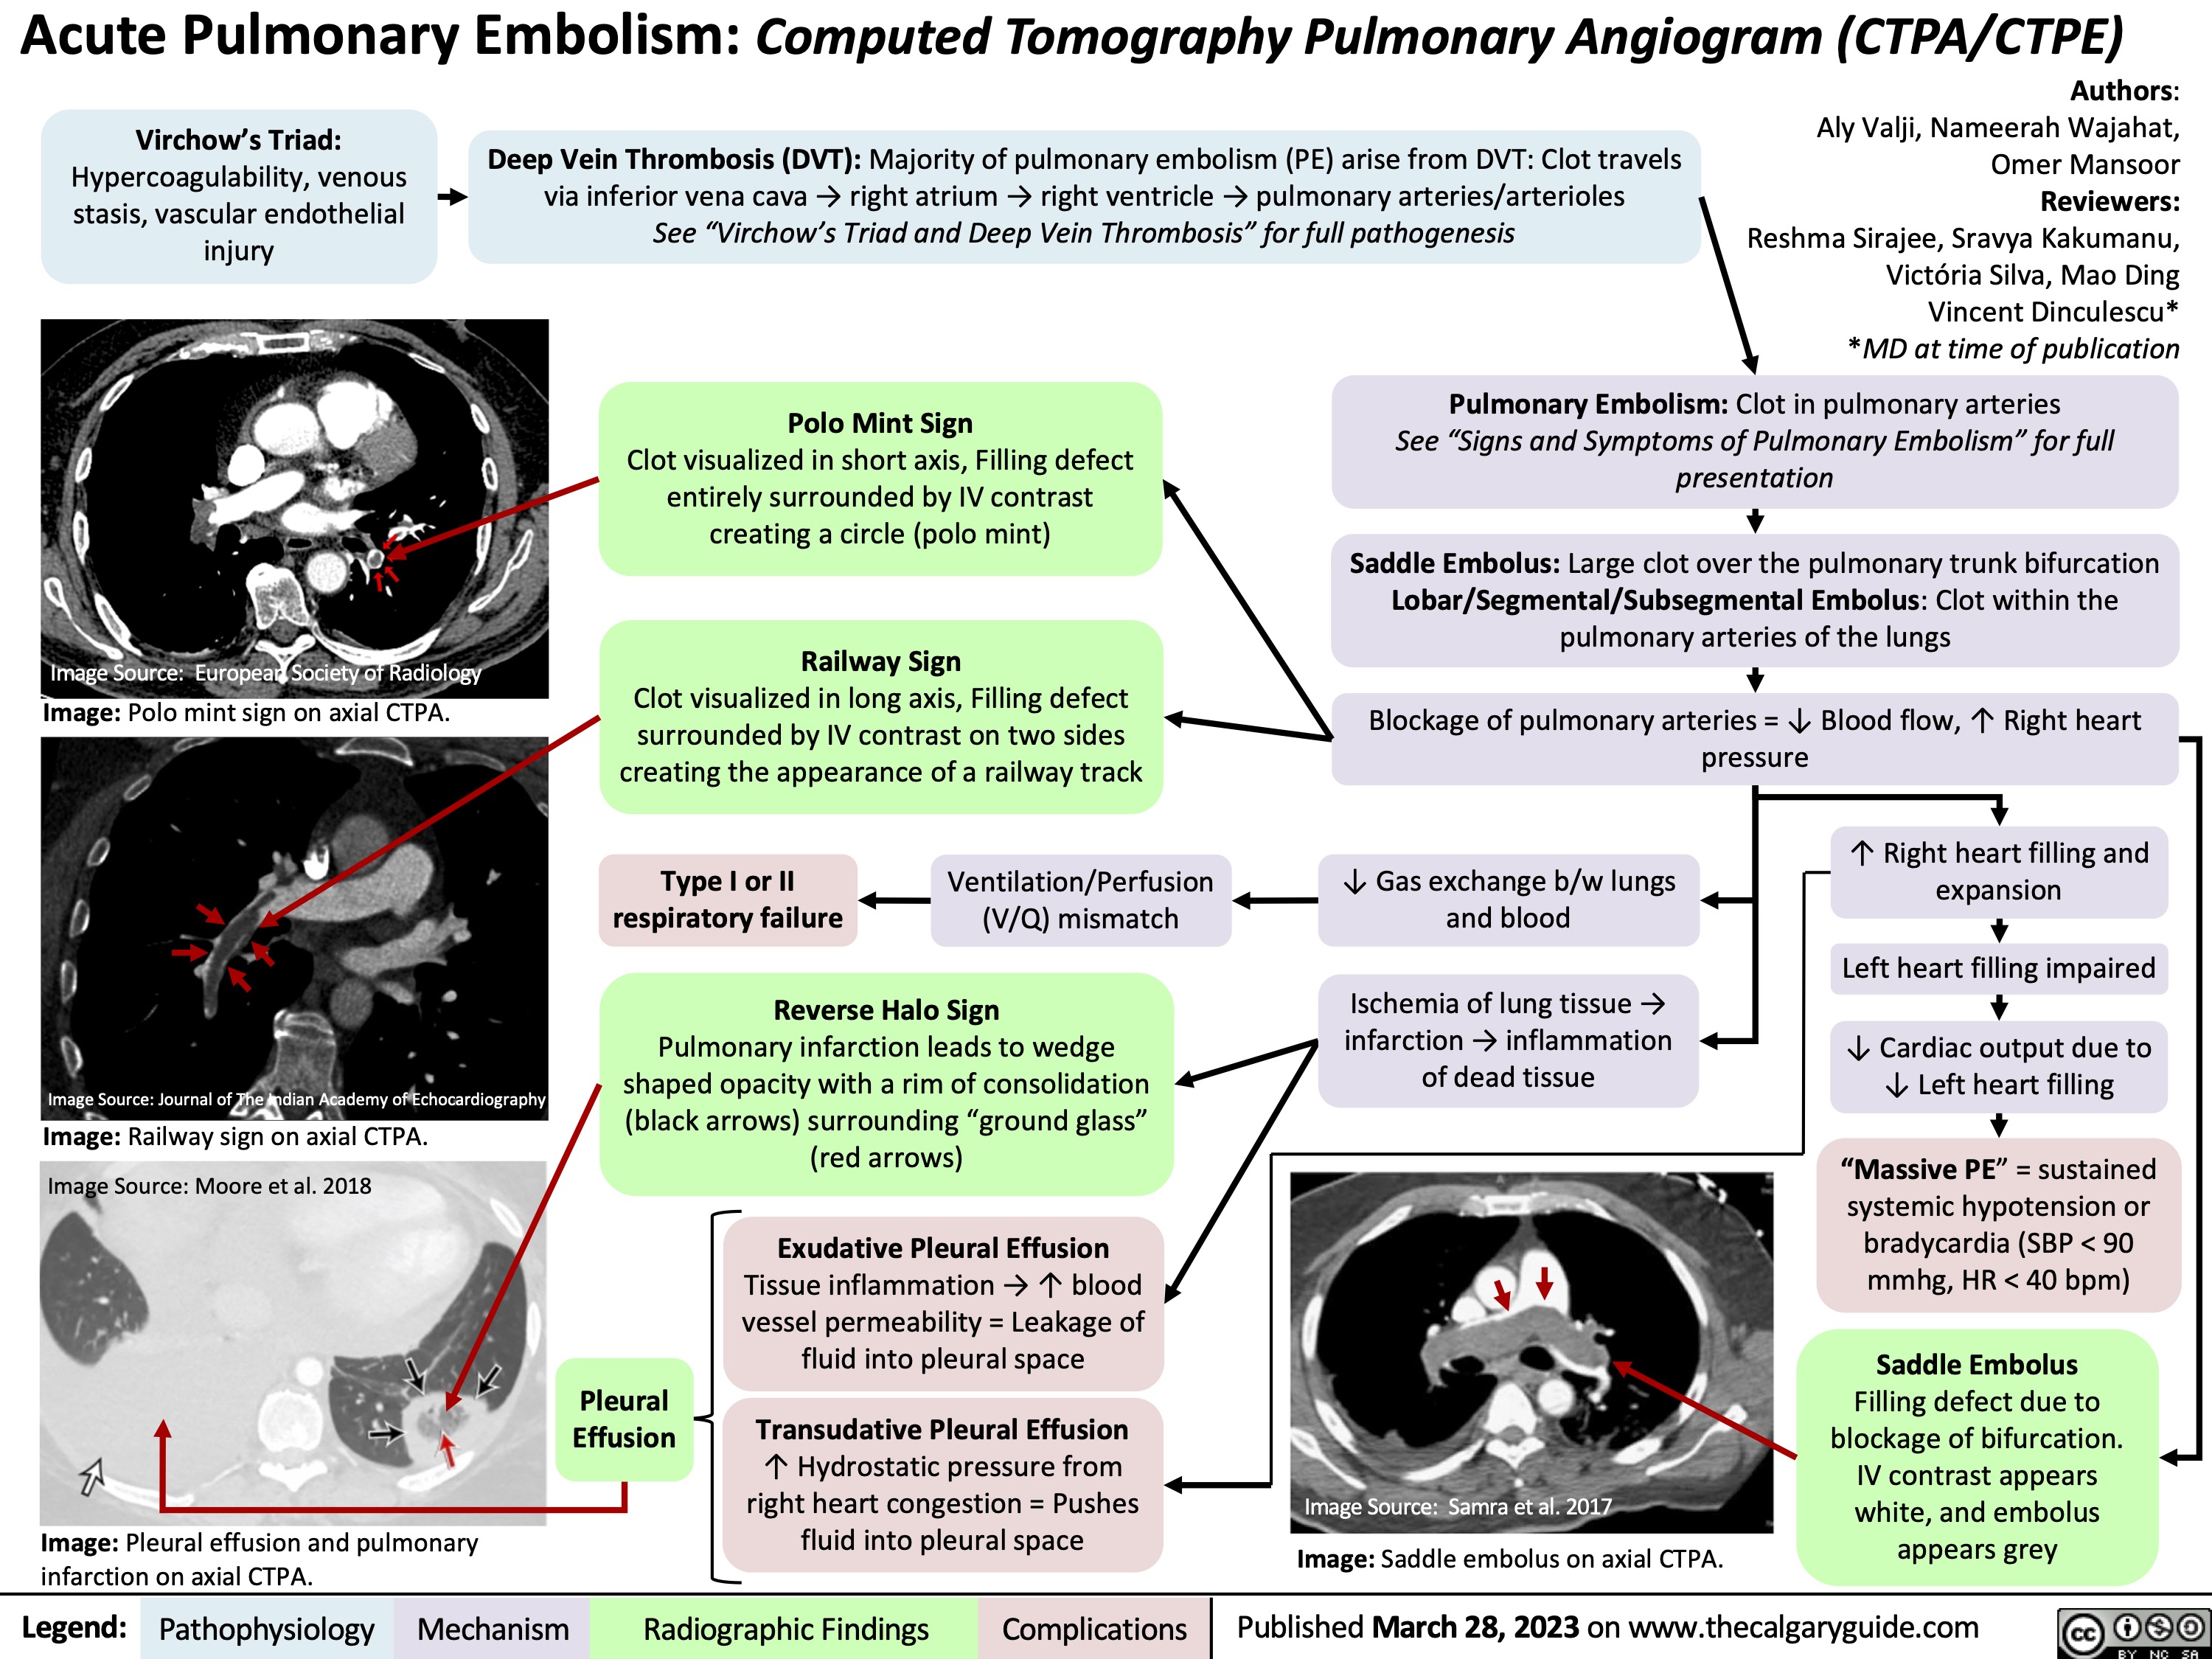 Acute Pulmonary Embolism: Computed Tomography Pulmonary Angiogram (CTPA/CTPE)
 Virchow’s Triad:
Hypercoagulability, venous stasis, vascular endothelial injury
Image Source: European Society of Radiology
Image: Polo mint sign on axial CTPA.
Image Source: Journal of The Indian Academy of Echocardiography
Image: Railway sign on axial CTPA. Image Source: Moore et al. 2018
Image: Pleural effusion and pulmonary infarction on axial CTPA.
Authors: Aly Valji, Nameerah Wajahat, Omer Mansoor Reviewers: Reshma Sirajee, Sravya Kakumanu, Victória Silva, Mao Ding Vincent Dinculescu* *MD at time of publication
 Deep Vein Thrombosis (DVT): Majority of pulmonary embolism (PE) arise from DVT: Clot travels via inferior vena cava → right atrium → right ventricle → pulmonary arteries/arterioles
See “Virchow’s Triad and Deep Vein Thrombosis” for full pathogenesis
    Polo Mint Sign
Clot visualized in short axis, Filling defect entirely surrounded by IV contrast creating a circle (polo mint)
Railway Sign
Clot visualized in long axis, Filling defect surrounded by IV contrast on two sides creating the appearance of a railway track
Type I or II Ventilation/Perfusion respiratory failure (V/Q) mismatch
Reverse Halo Sign
Pulmonary infarction leads to wedge shaped opacity with a rim of consolidation (black arrows) surrounding “ground glass” (red arrows)
Pulmonary Embolism: Clot in pulmonary arteries
See “Signs and Symptoms of Pulmonary Embolism” for full presentation
Saddle Embolus: Large clot over the pulmonary trunk bifurcation Lobar/Segmental/Subsegmental Embolus: Clot within the pulmonary arteries of the lungs
Blockage of pulmonary arteries = ↓ Blood flow, ↑ Right heart pressure
              ↓ Gas exchange b/w lungs and blood
Ischemia of lung tissue → infarction → inflammation of dead tissue
↑ Right heart filling and expansion
Left heart filling impaired
↓ Cardiac output due to ↓ Left heart filling
“Massive PE” = sustained systemic hypotension or bradycardia (SBP < 90 mmhg, HR < 40 bpm)
Saddle Embolus
Filling defect due to blockage of bifurcation. IV contrast appears white, and embolus appears grey
               Pleural Effusion
Exudative Pleural Effusion
Tissue inflammation → ↑ blood vessel permeability = Leakage of fluid into pleural space
Transudative Pleural Effusion
↑ Hydrostatic pressure from right heart congestion = Pushes fluid into pleural space
  Image Source: Samra et al. 2017
Image: Saddle embolus on axial CTPA.
 Legend:
 Pathophysiology
Mechanism
Radiographic Findings
 Complications
Published March 28, 2023 on www.thecalgaryguide.com
    